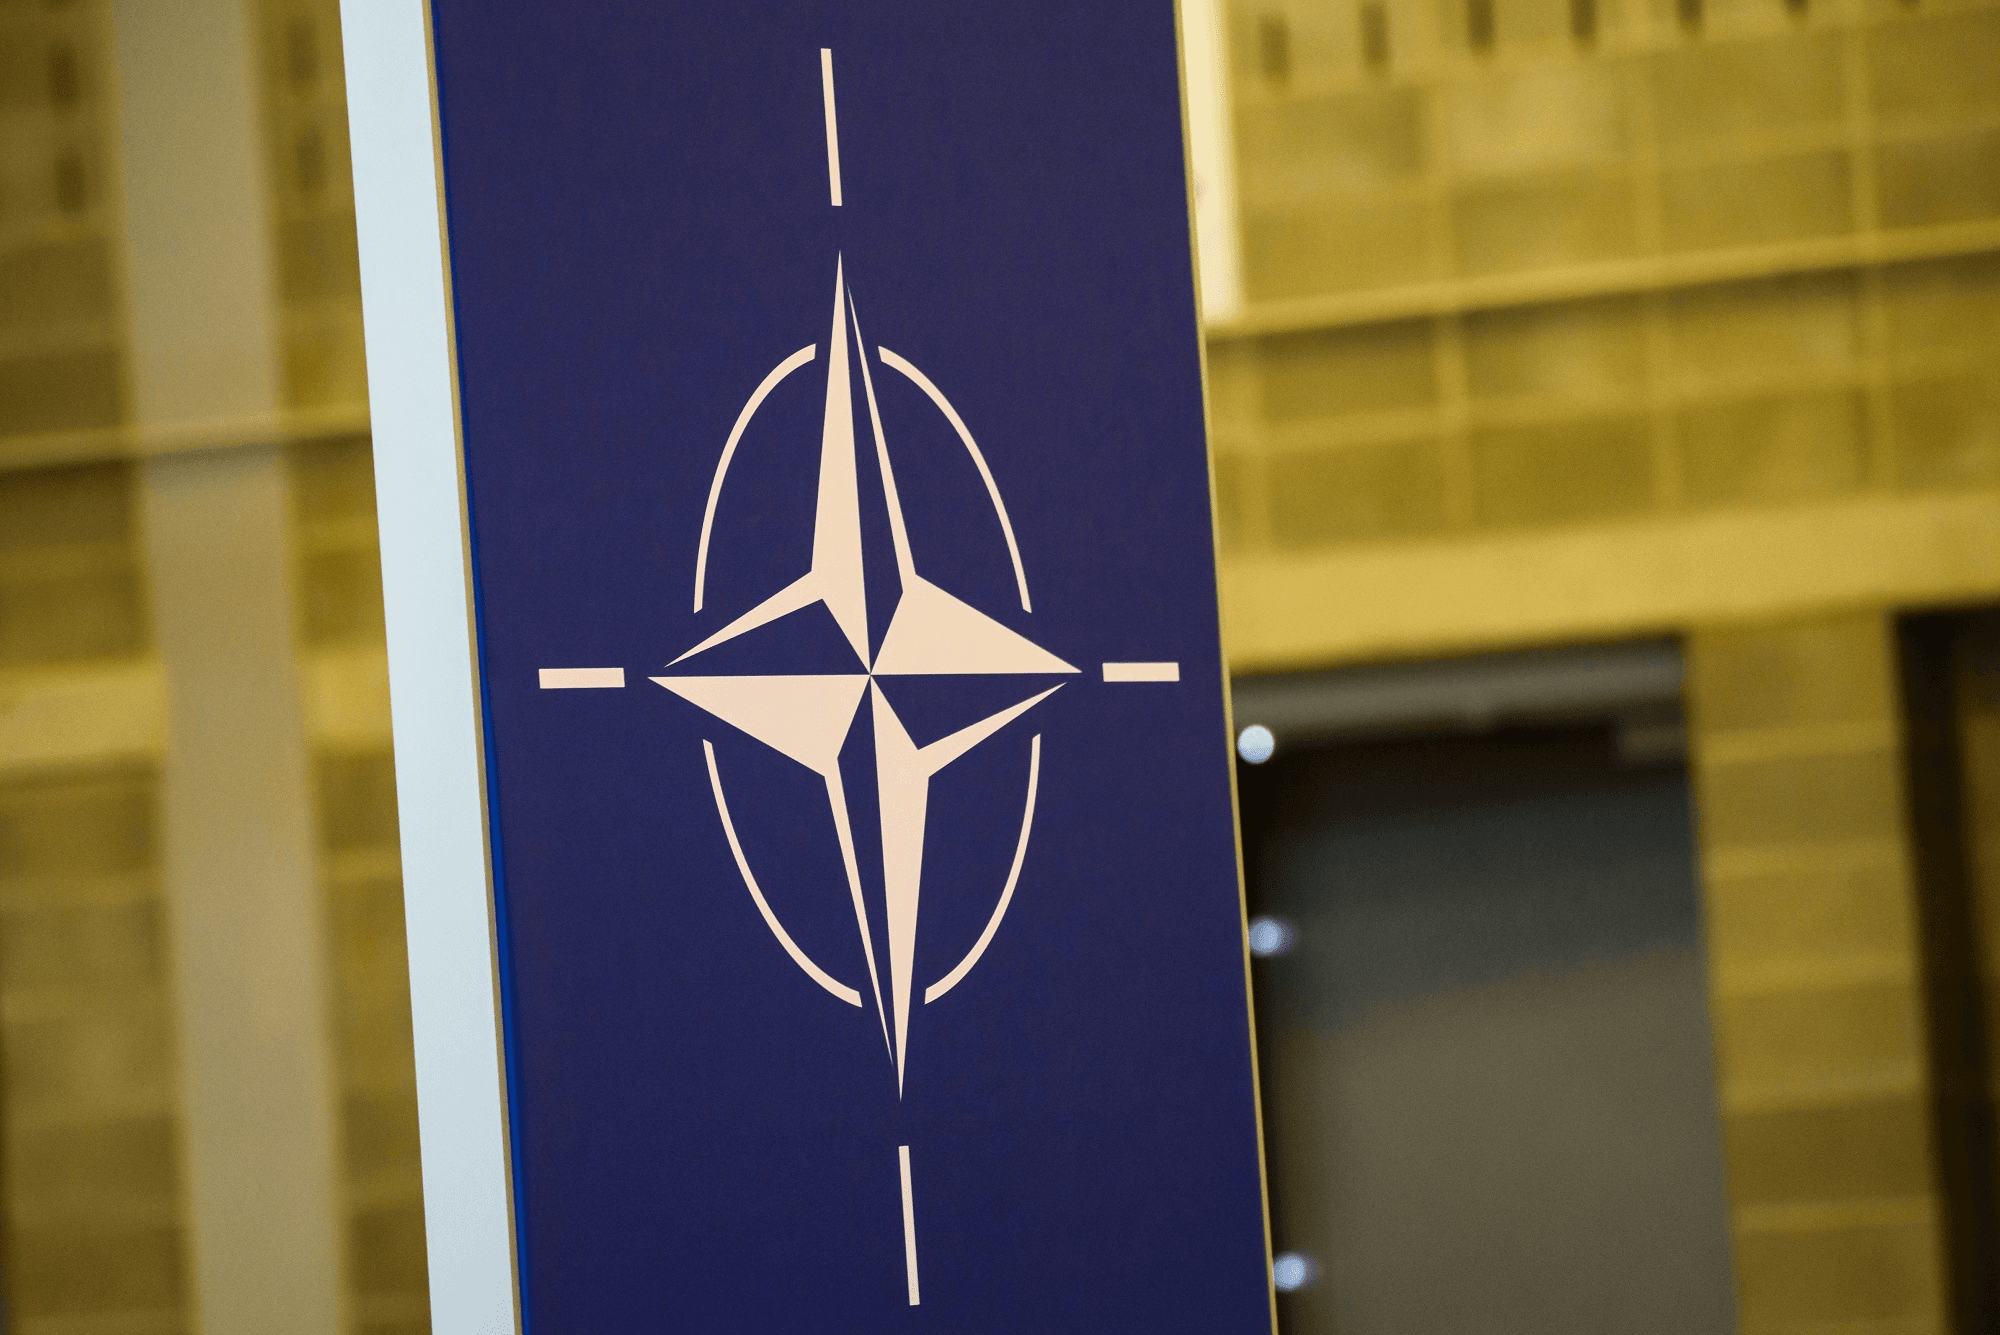 Image NATO in Madrid: the 5 Major Elements